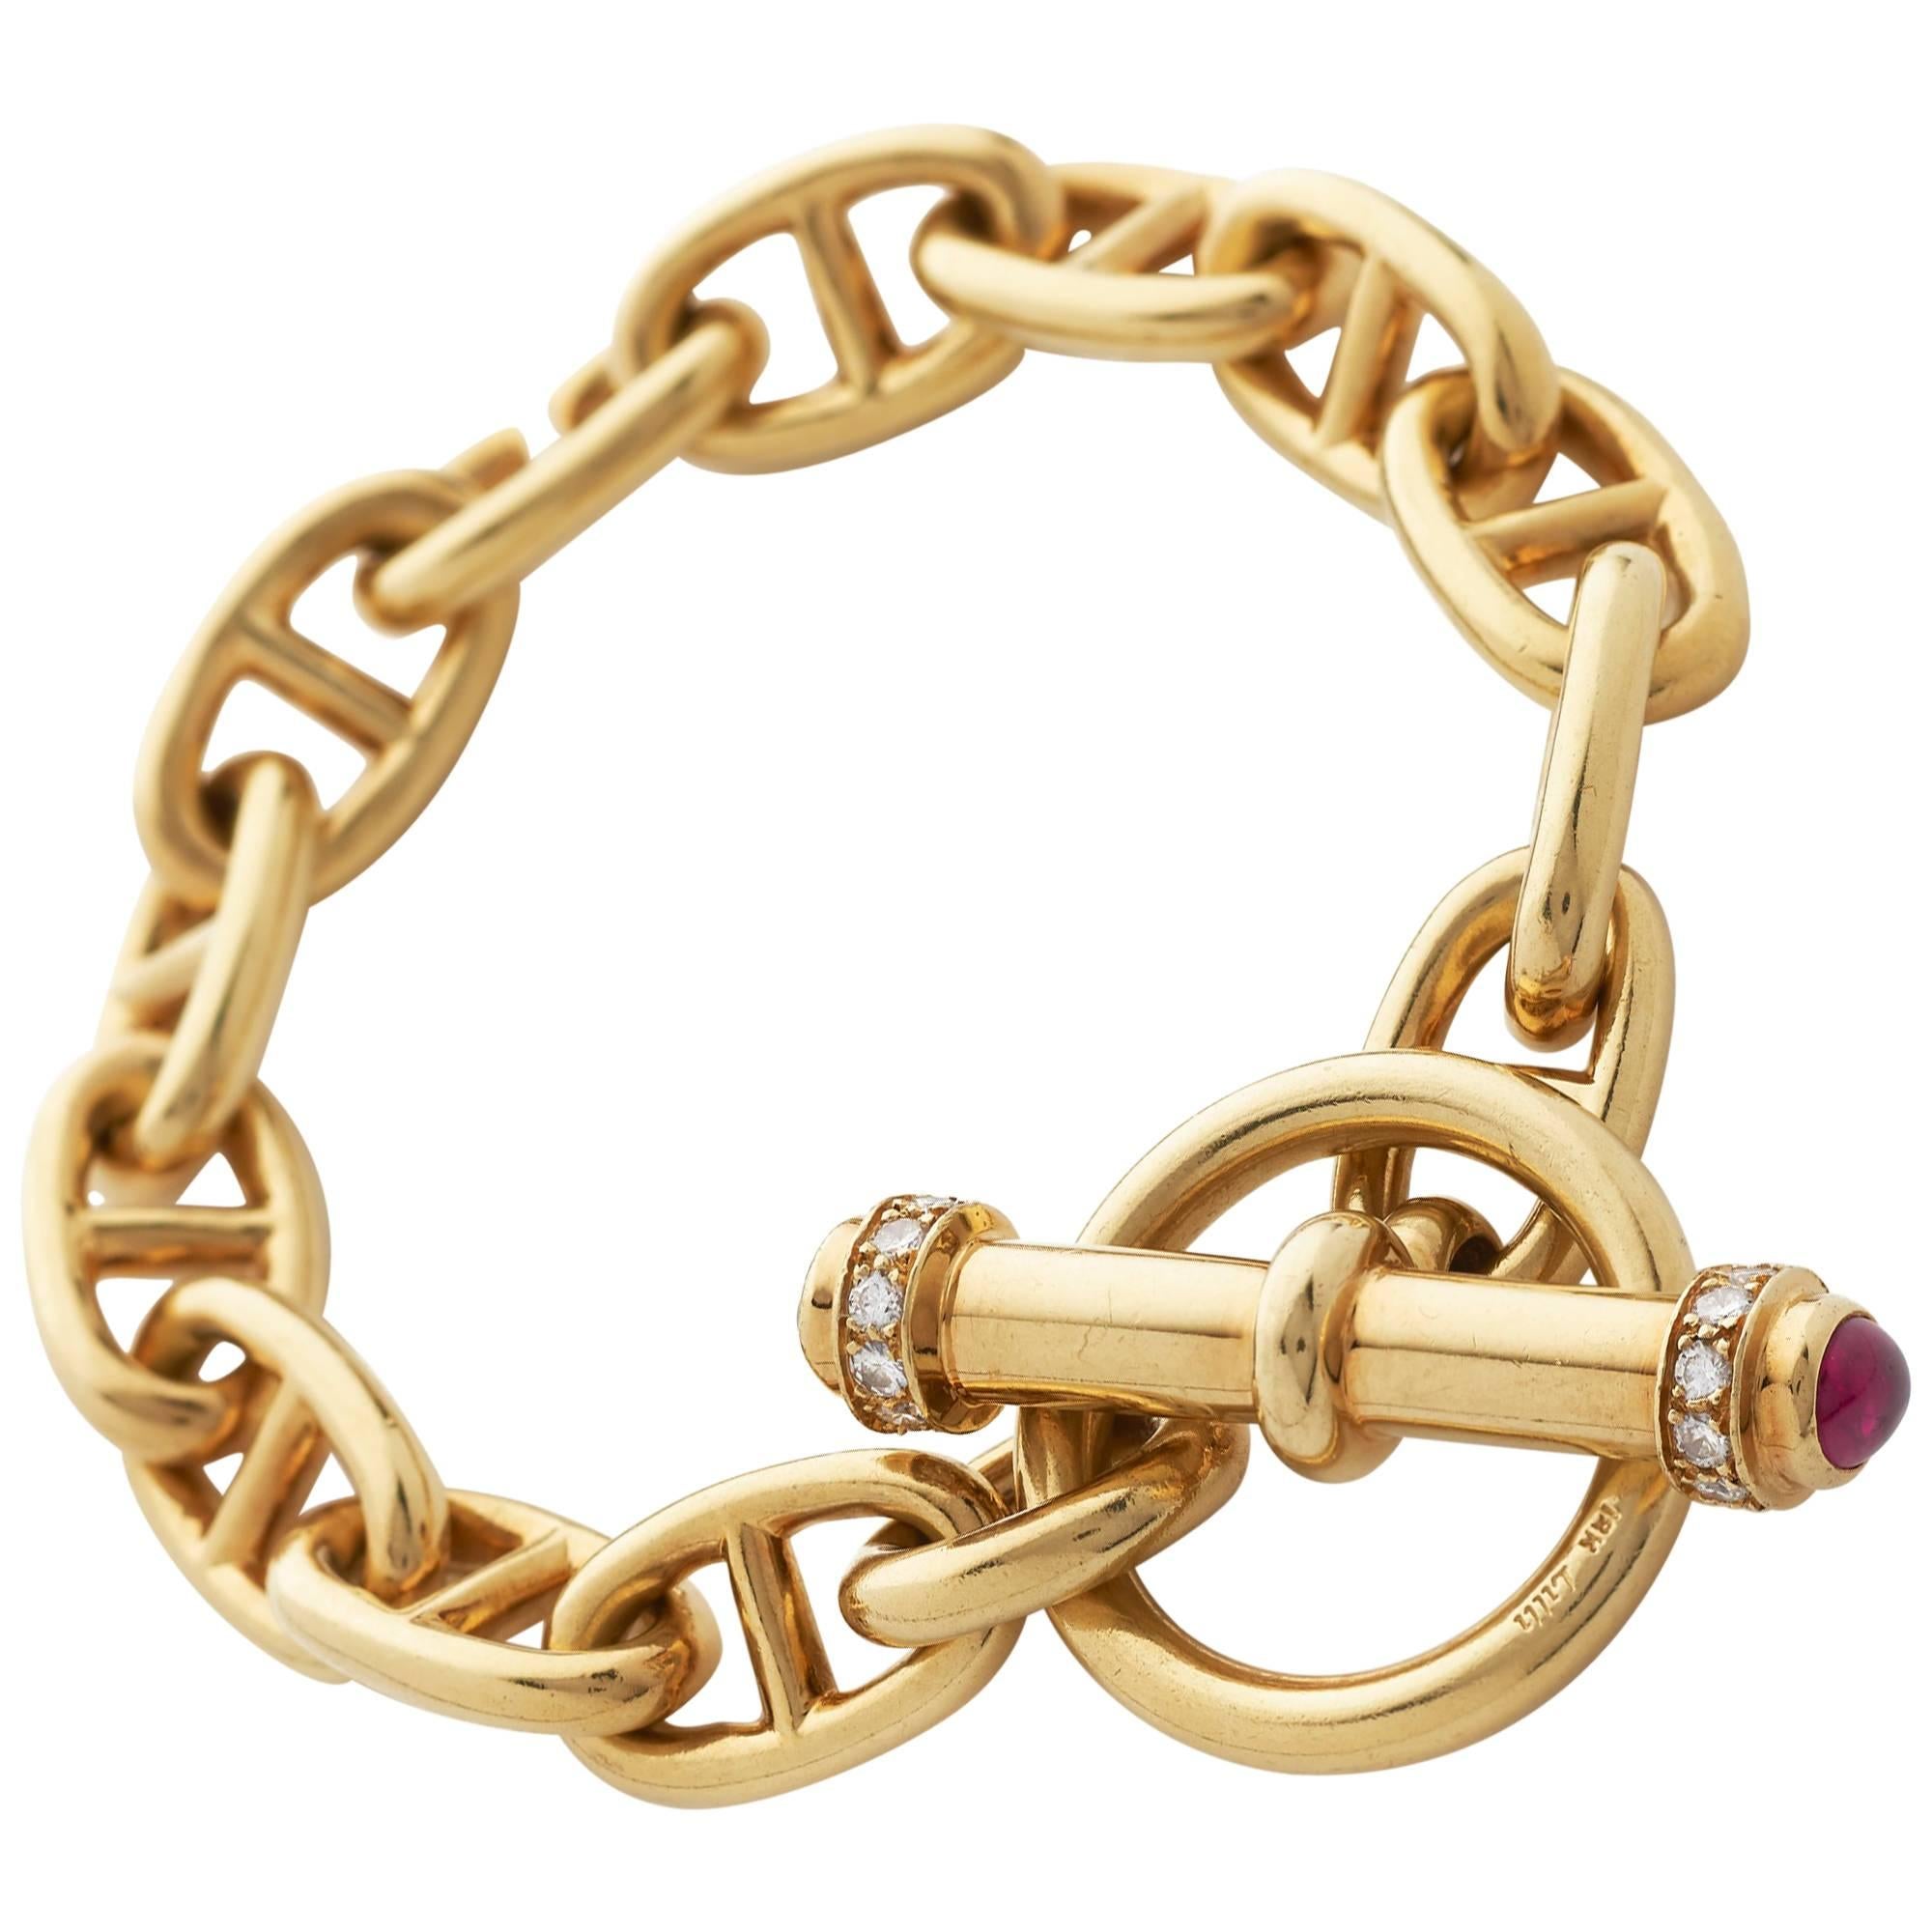 Gold Anchor Link Bracelet with Ruby and Diamond Set Toggle Clasp